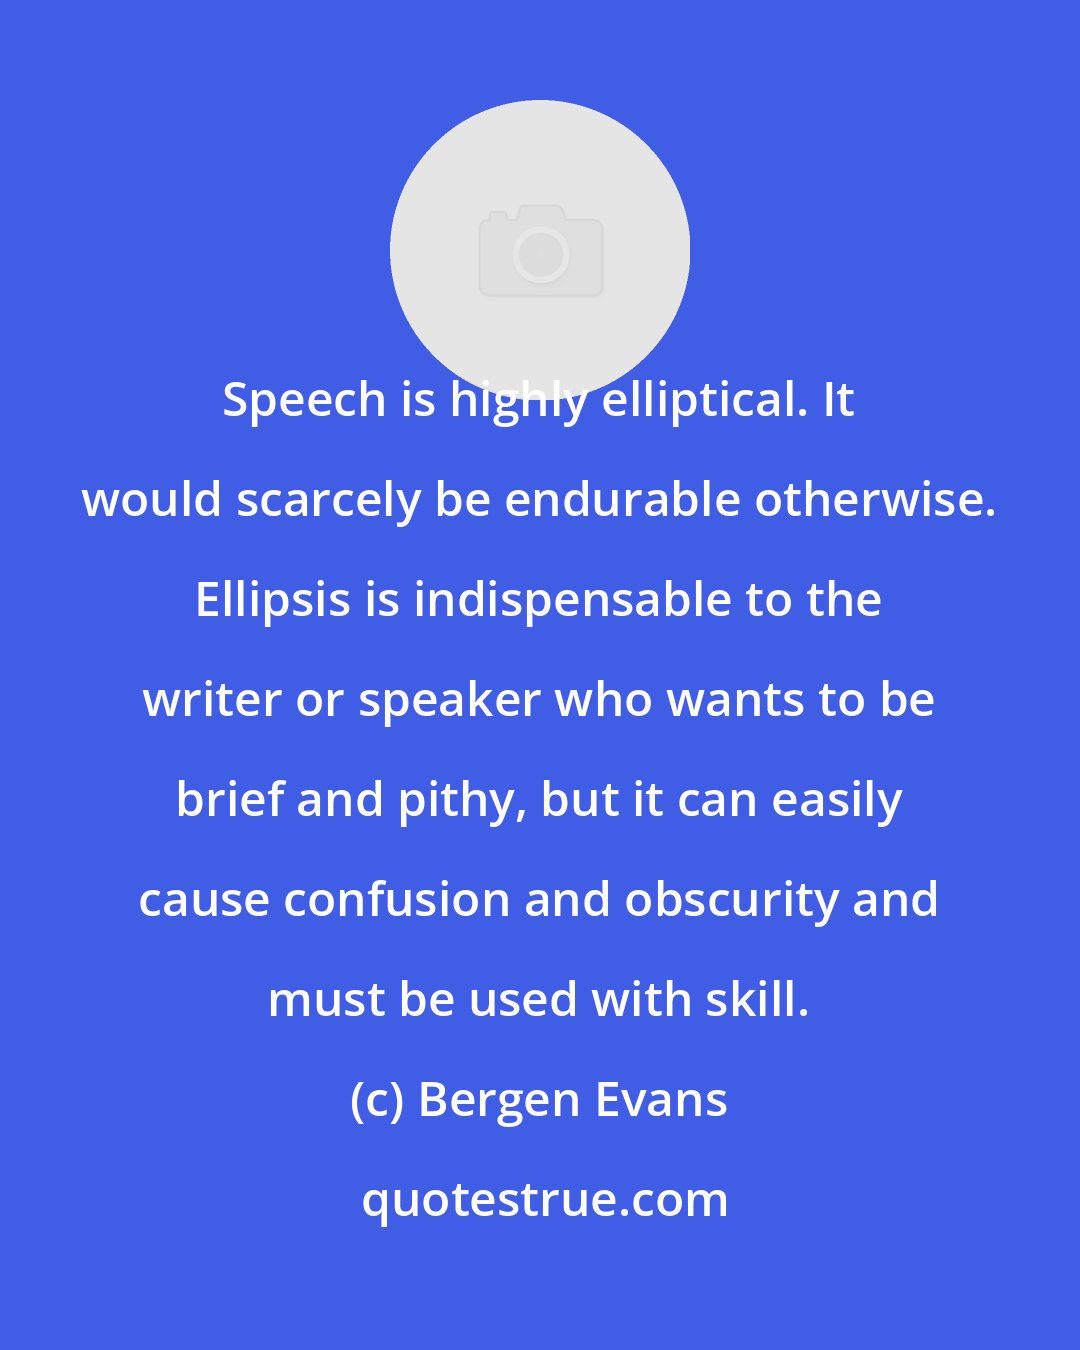 Bergen Evans: Speech is highly elliptical. It would scarcely be endurable otherwise. Ellipsis is indispensable to the writer or speaker who wants to be brief and pithy, but it can easily cause confusion and obscurity and must be used with skill.